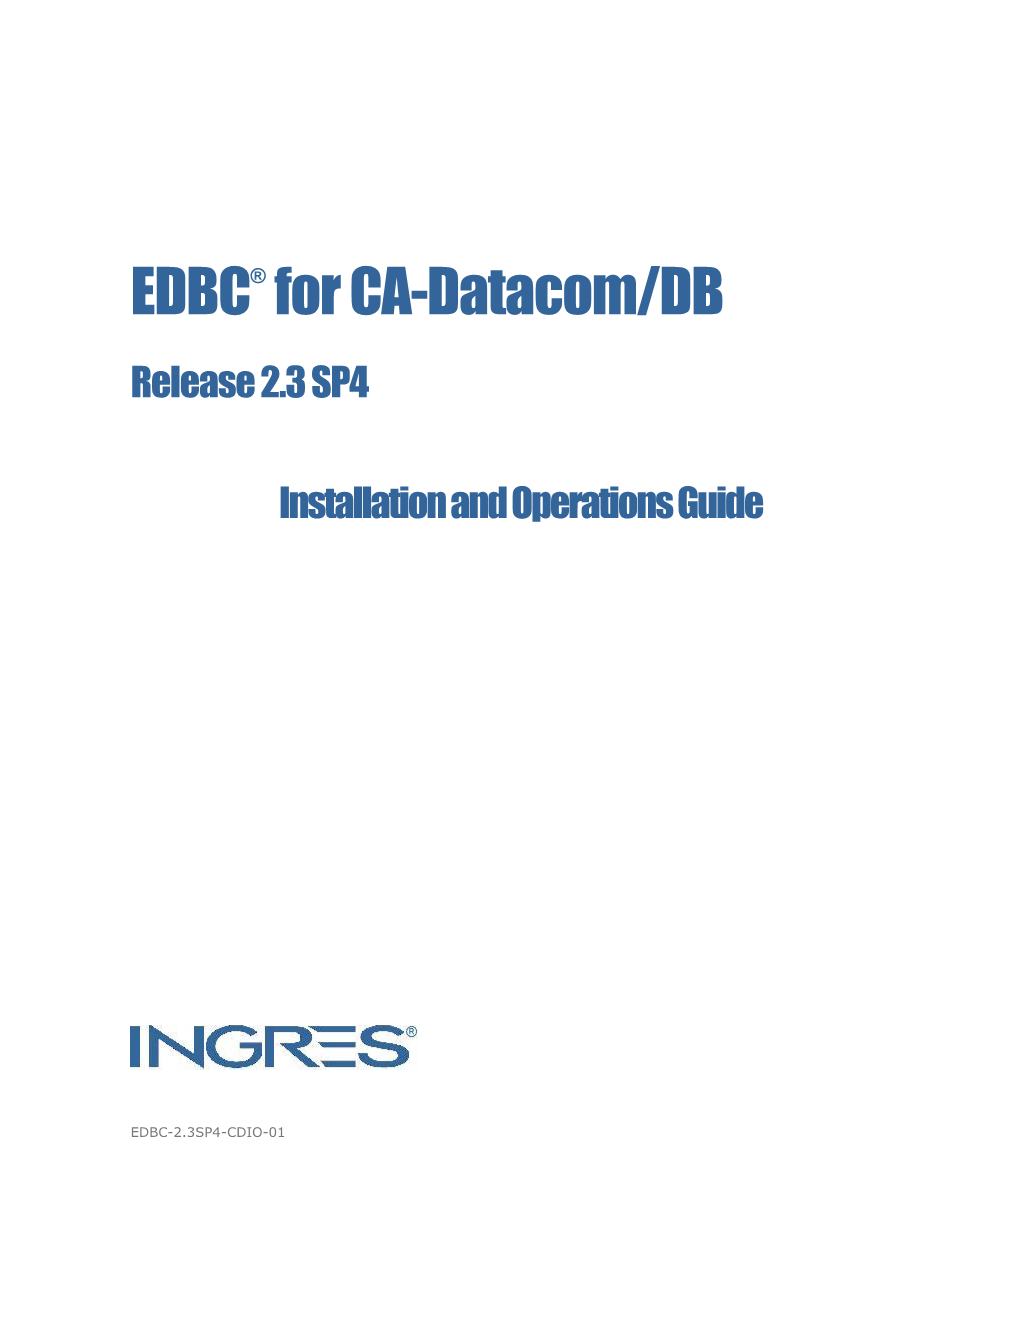 EDBC for CA-Datacom/DB Installation and Operations Guide